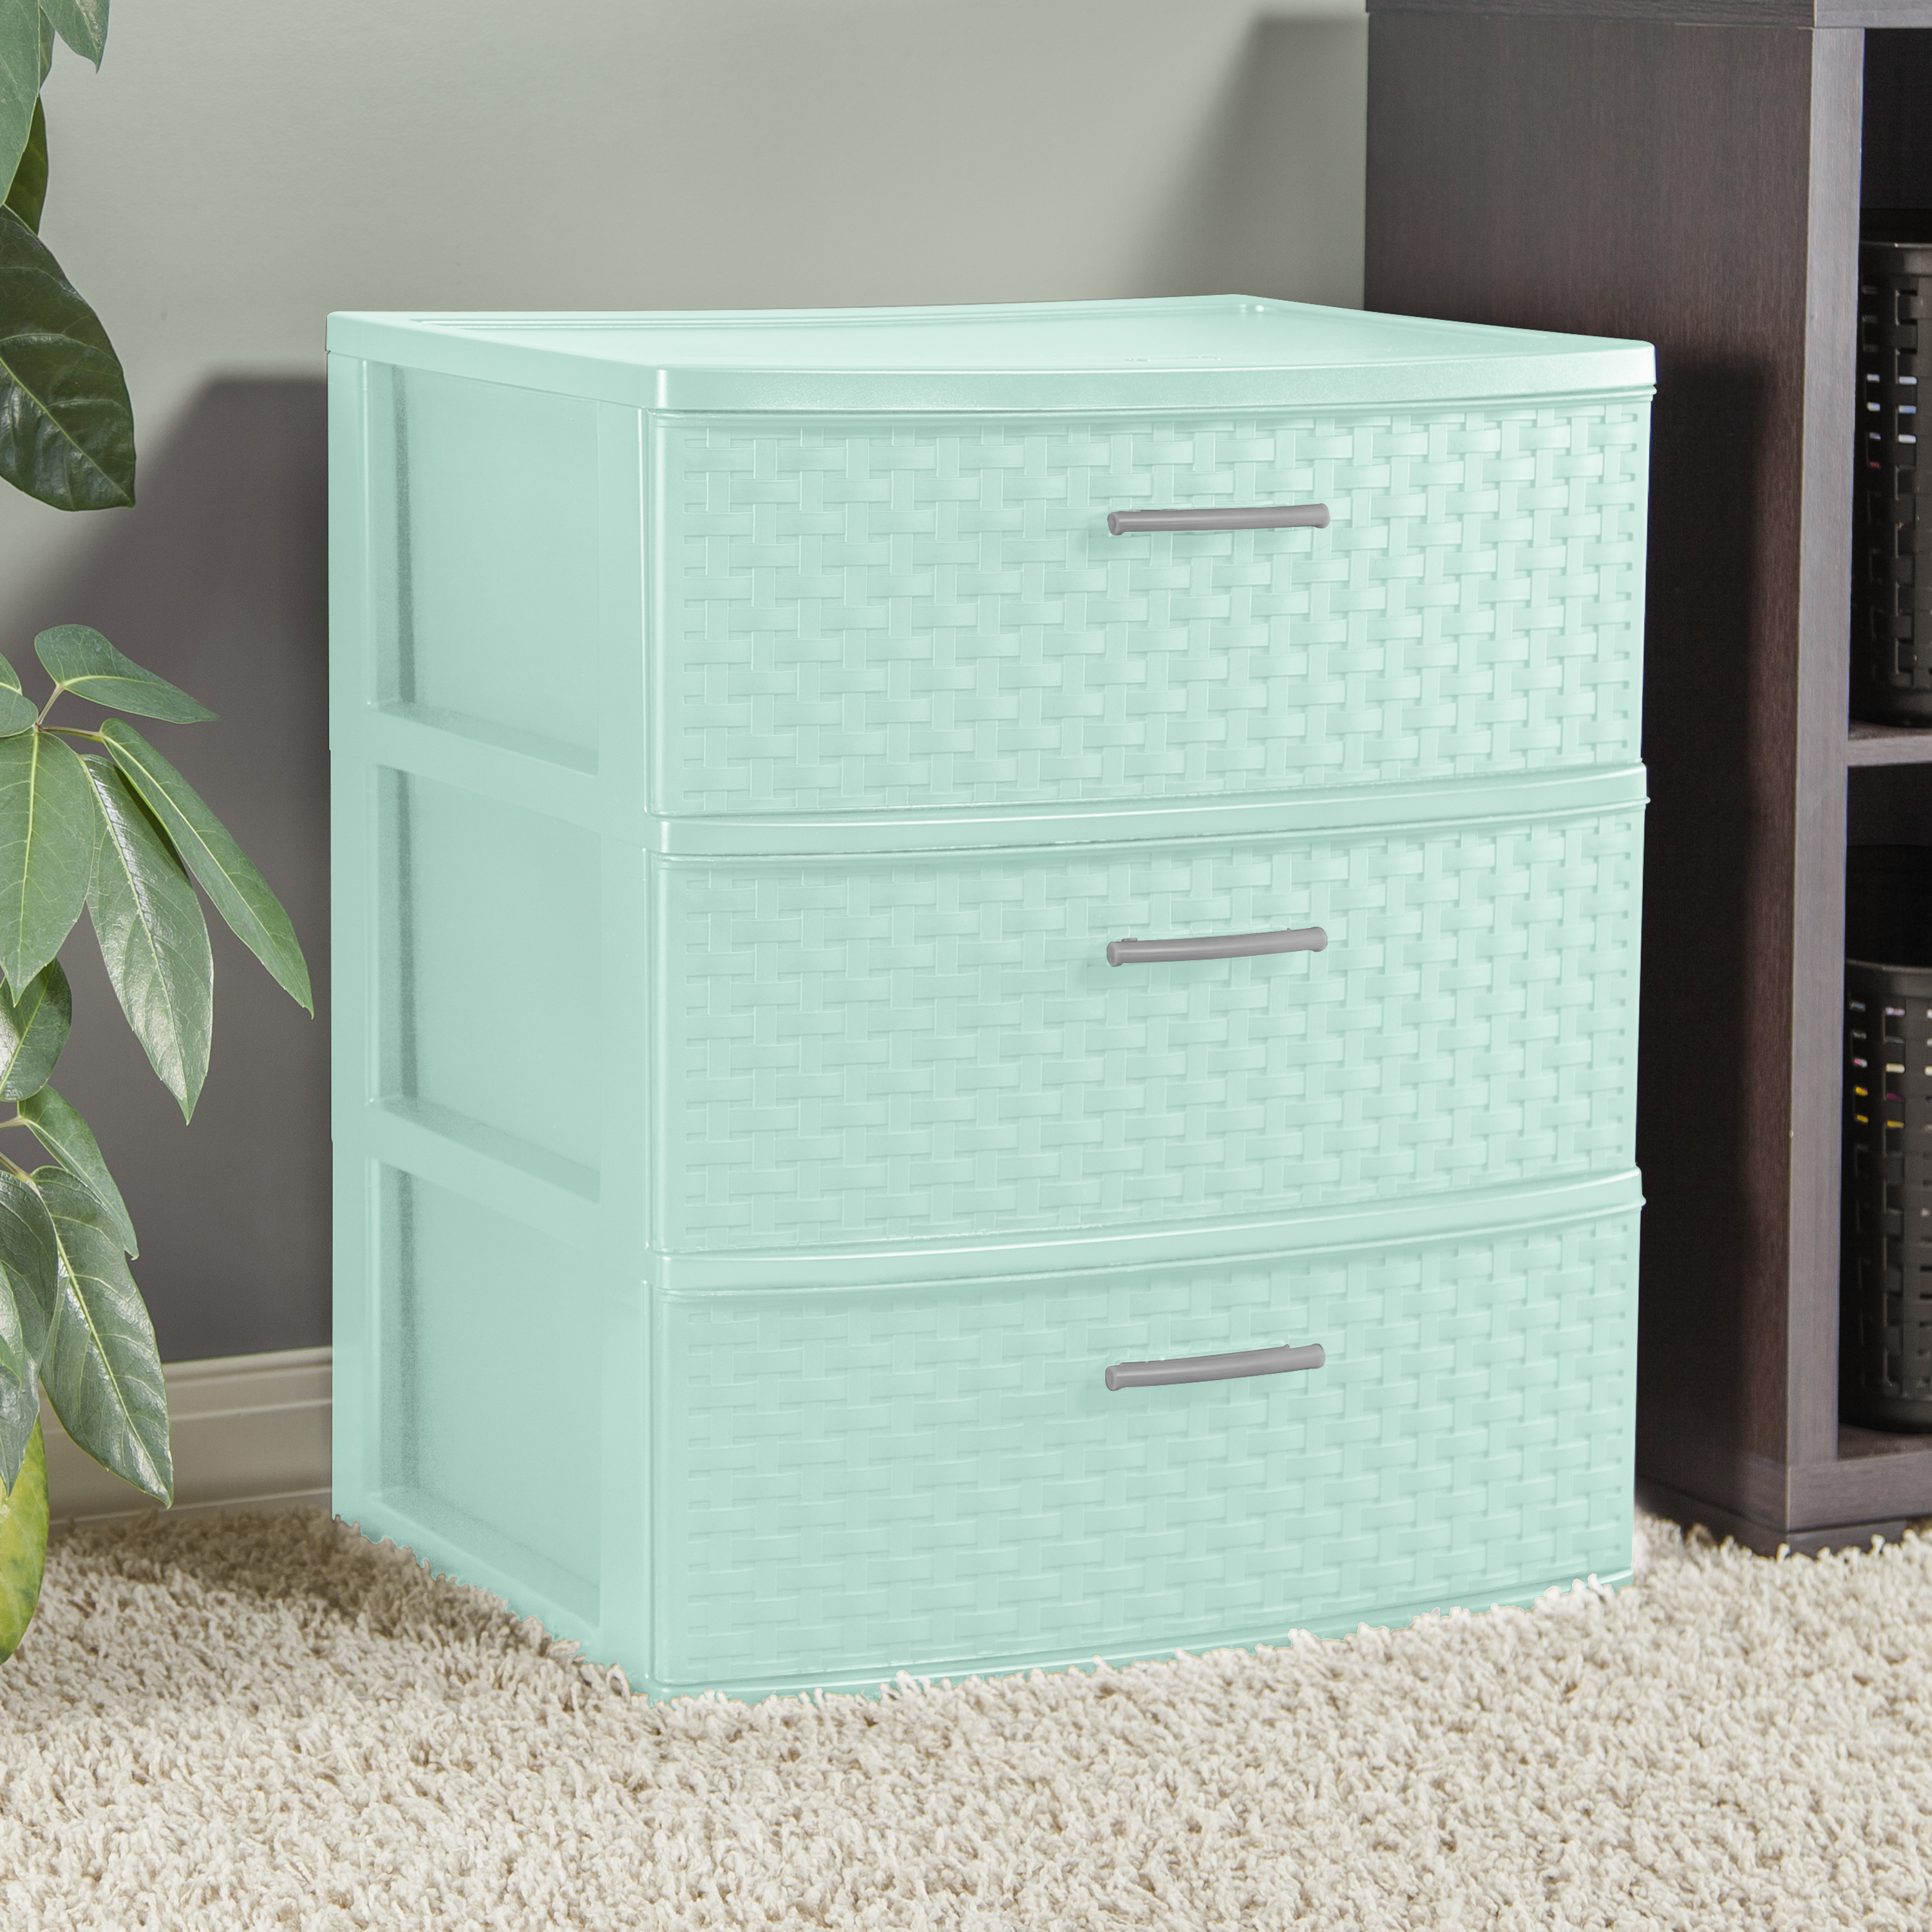 Sterilite 3 Drawer Wide Weave Tower Classic Mint - image 3 of 9